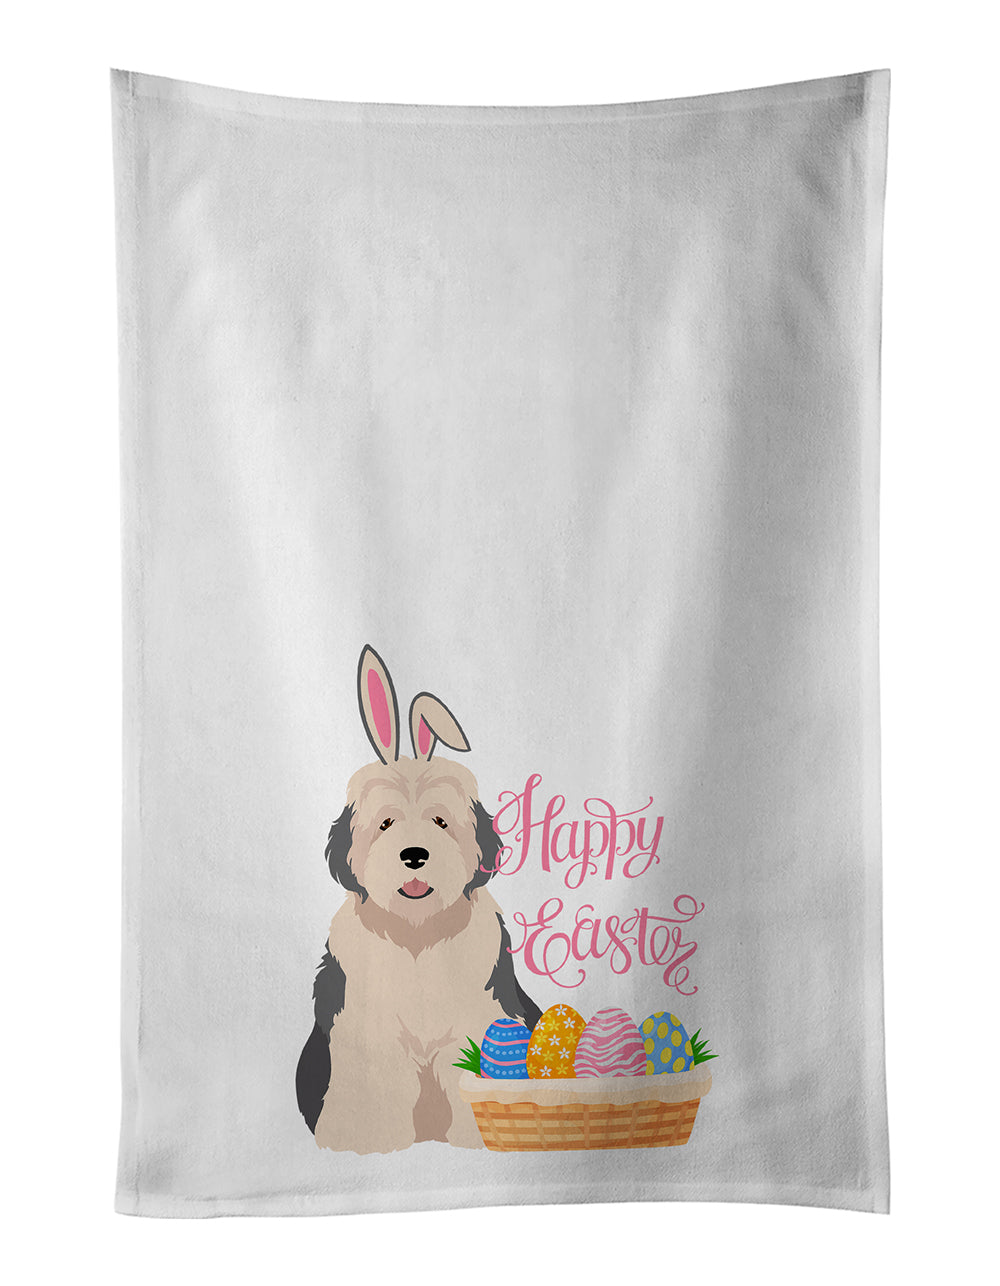 Buy this Old English Sheepdog Easter White Kitchen Towel Set of 2 Dish Towels